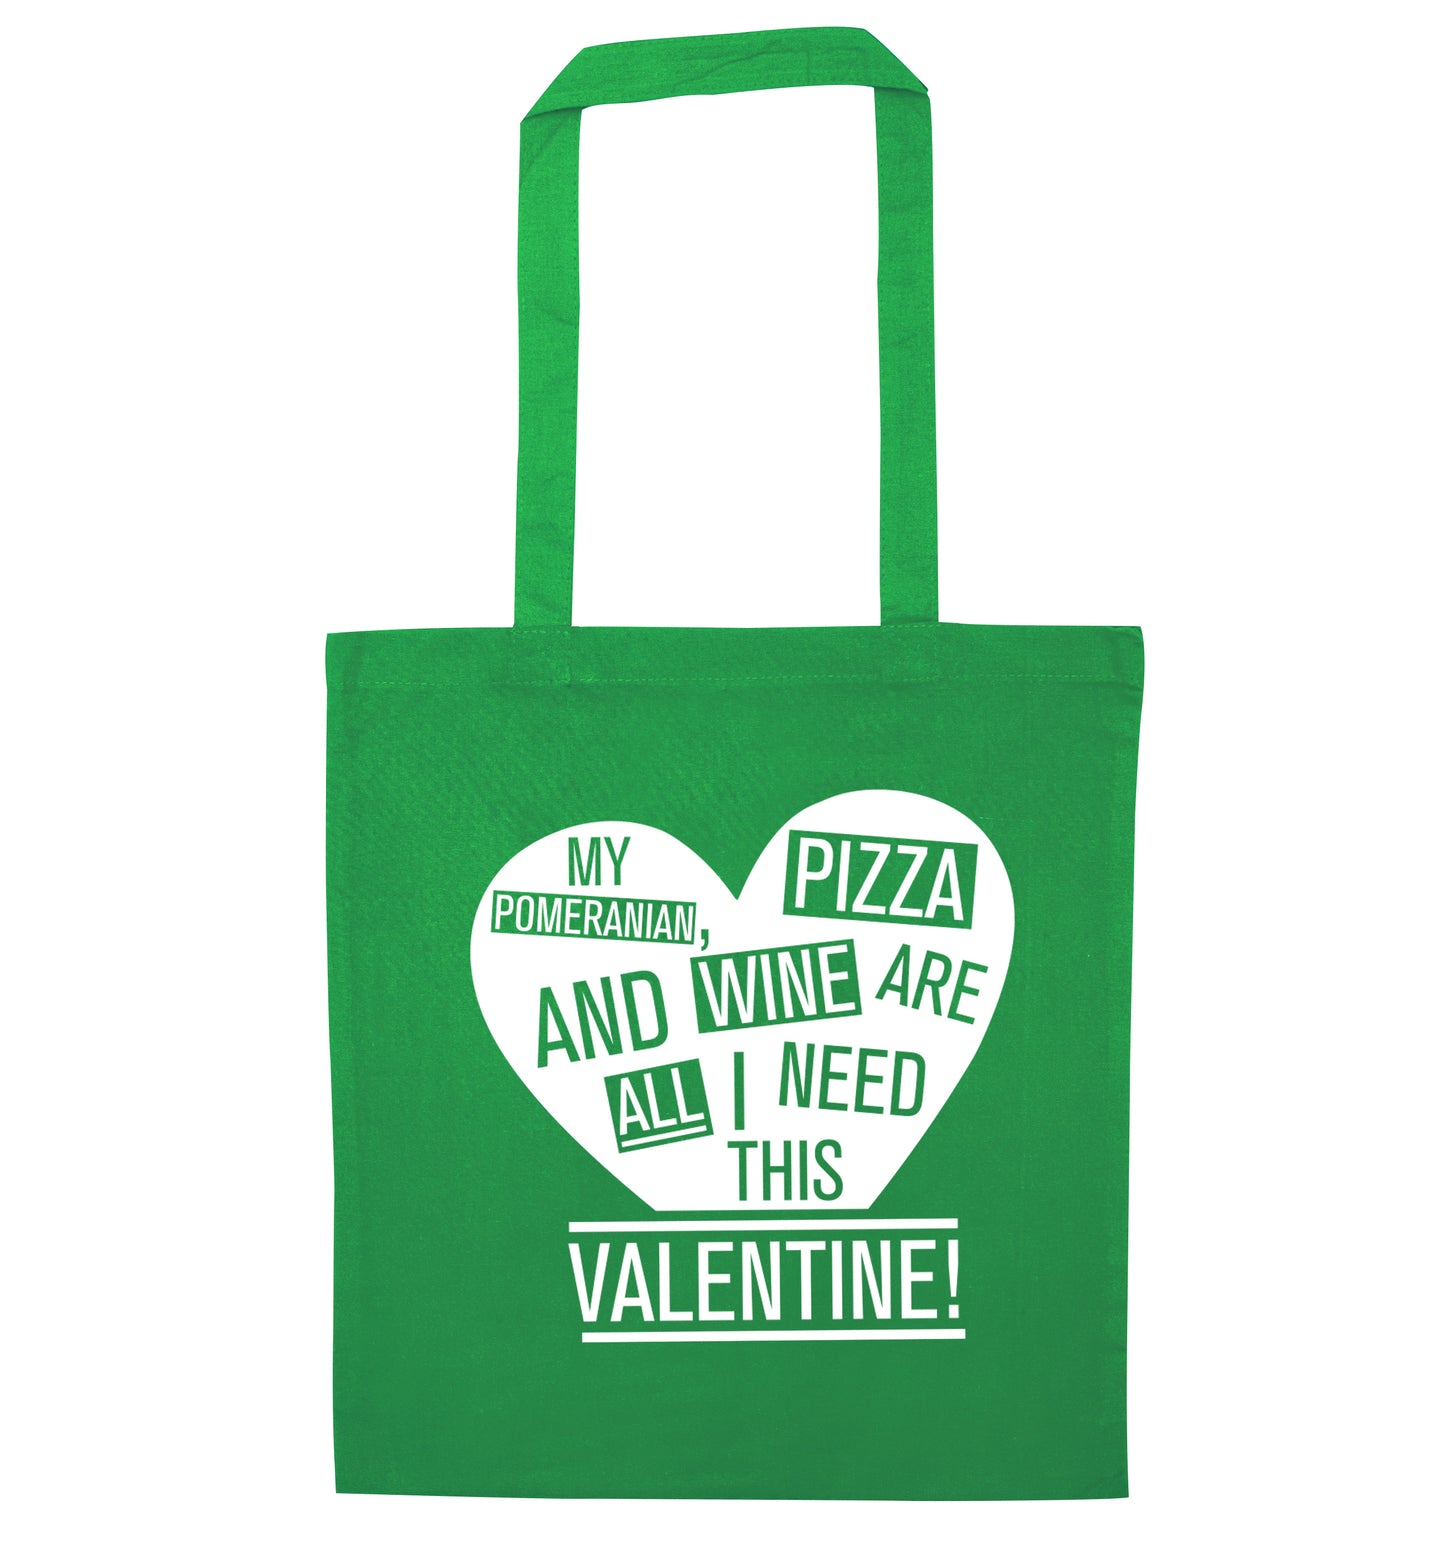 My pomeranian, chocolate and wine are all I need this valentine! green tote bag